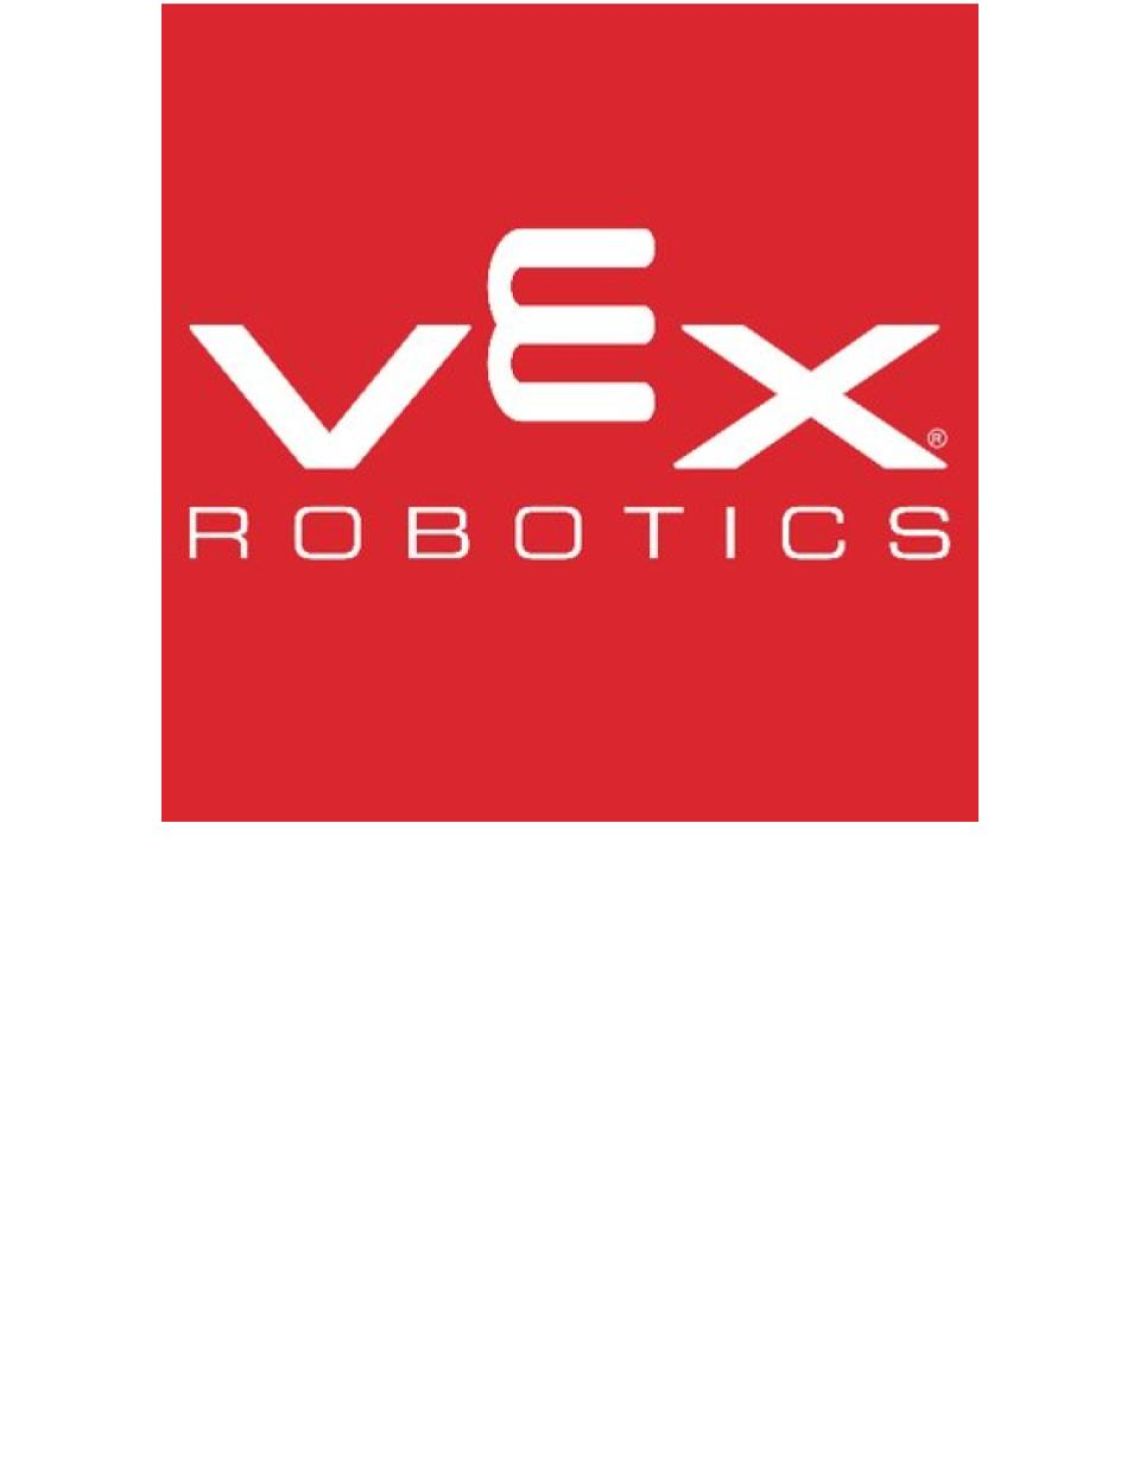 VEX robotics logo with words Inspiration for the future